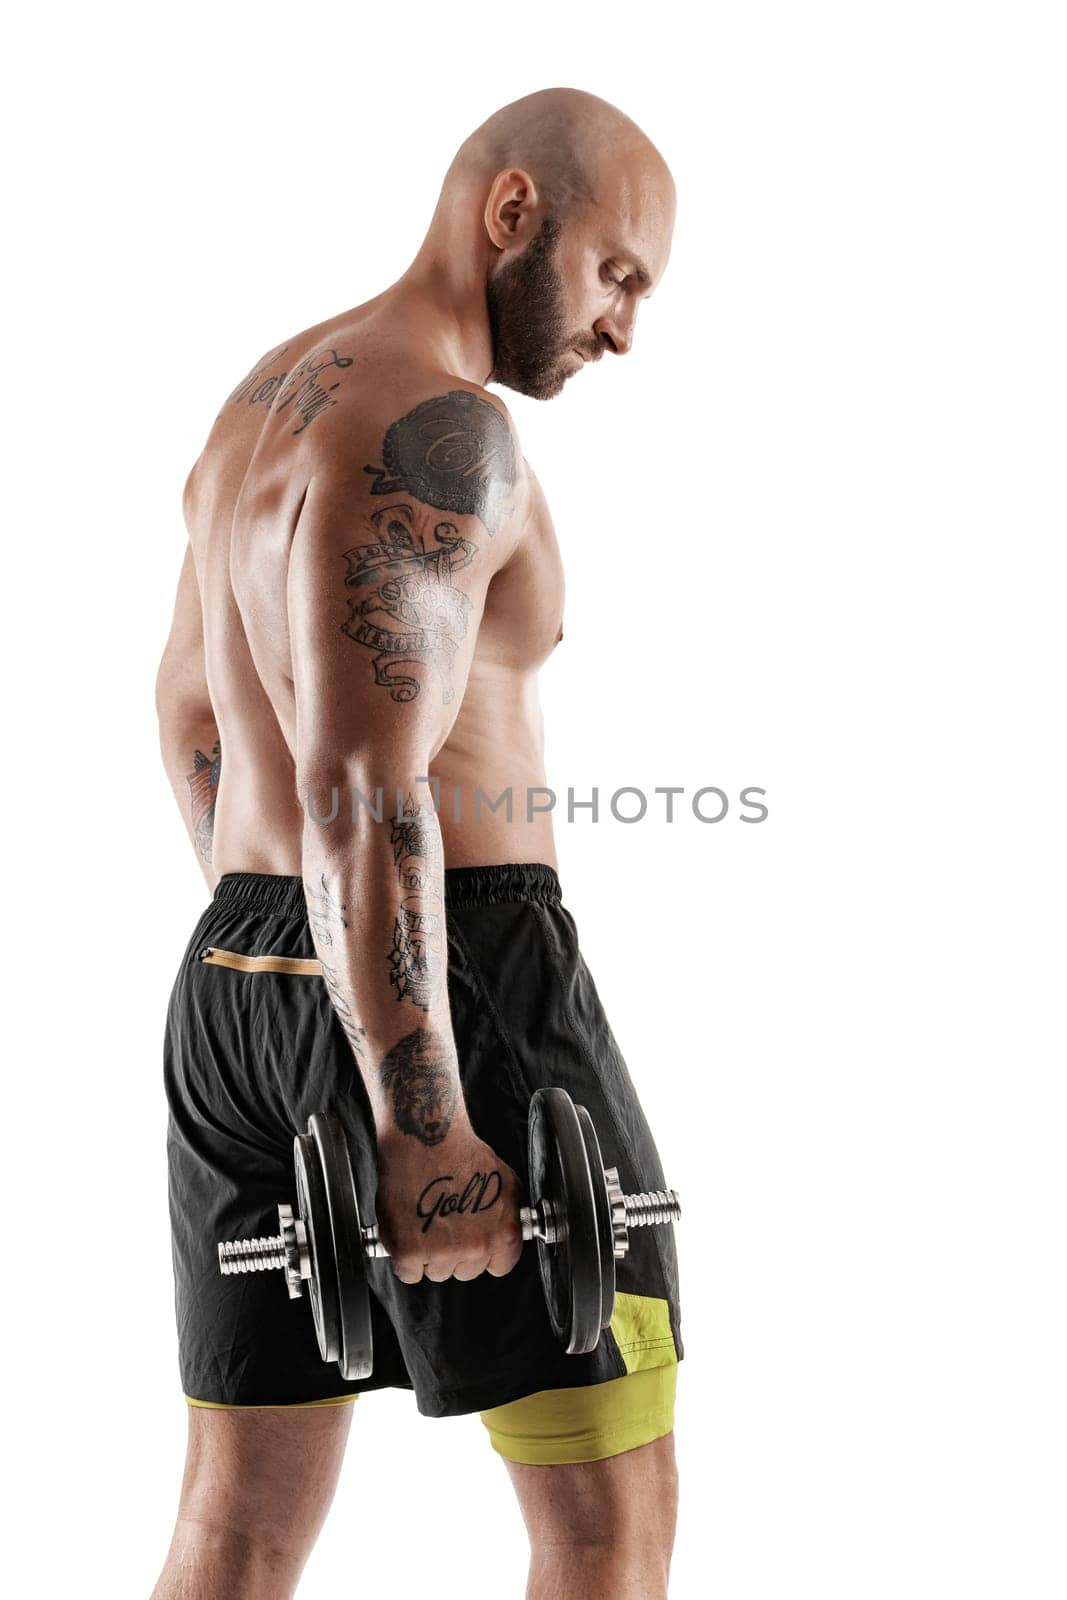 Athletic bald, tattooed man in black shorts is posing with a dumbbell isolated on white background. Close-up portrait. by nazarovsergey